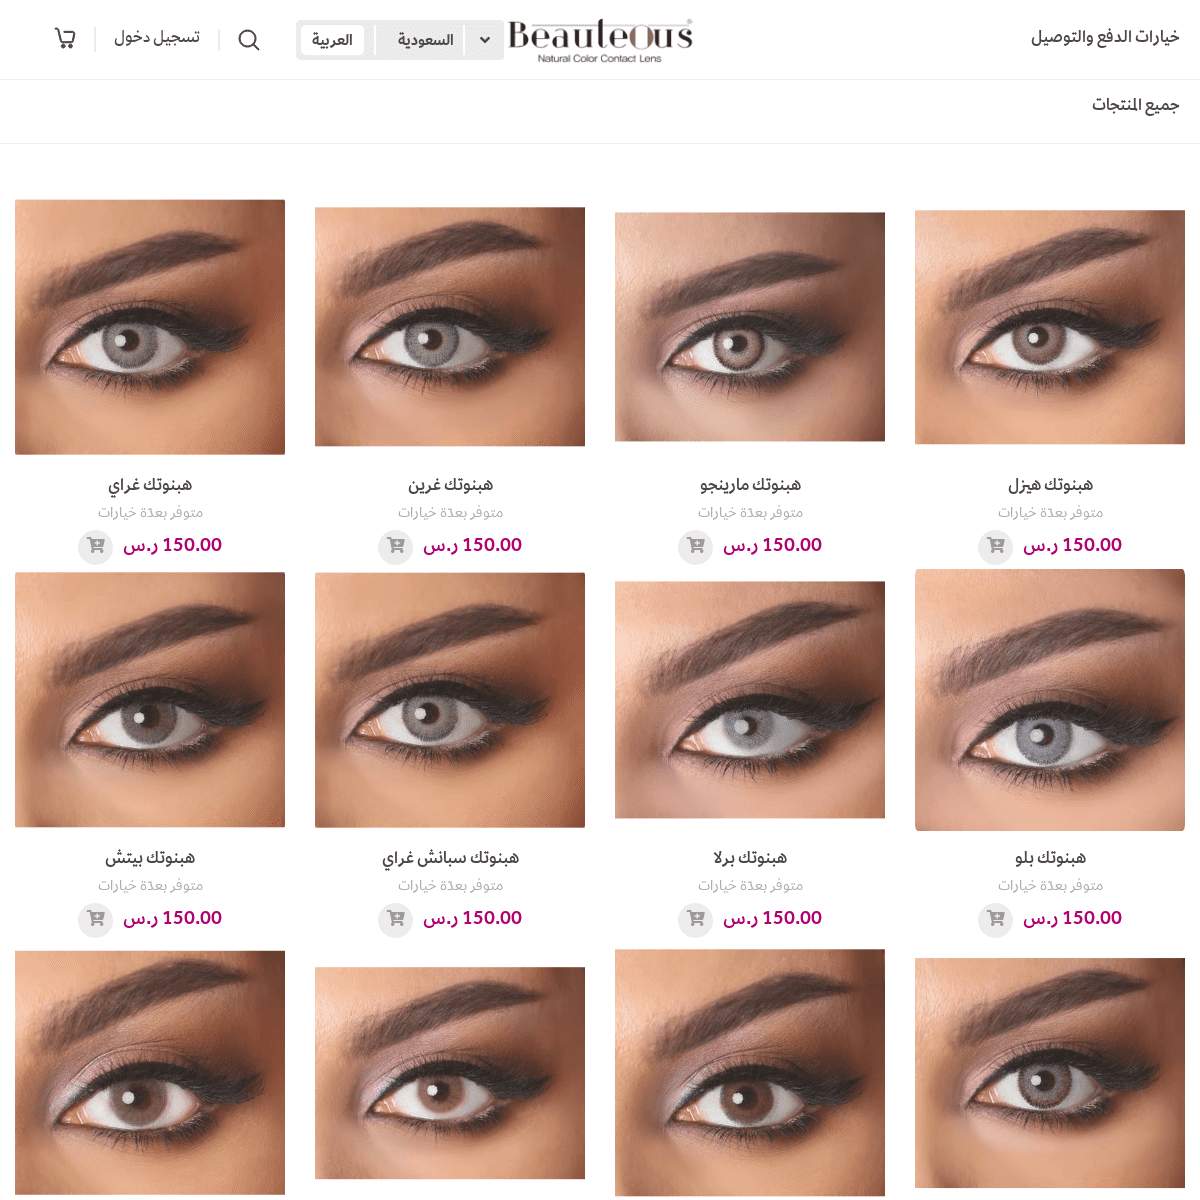 A complete backup of beauteouslenses.com